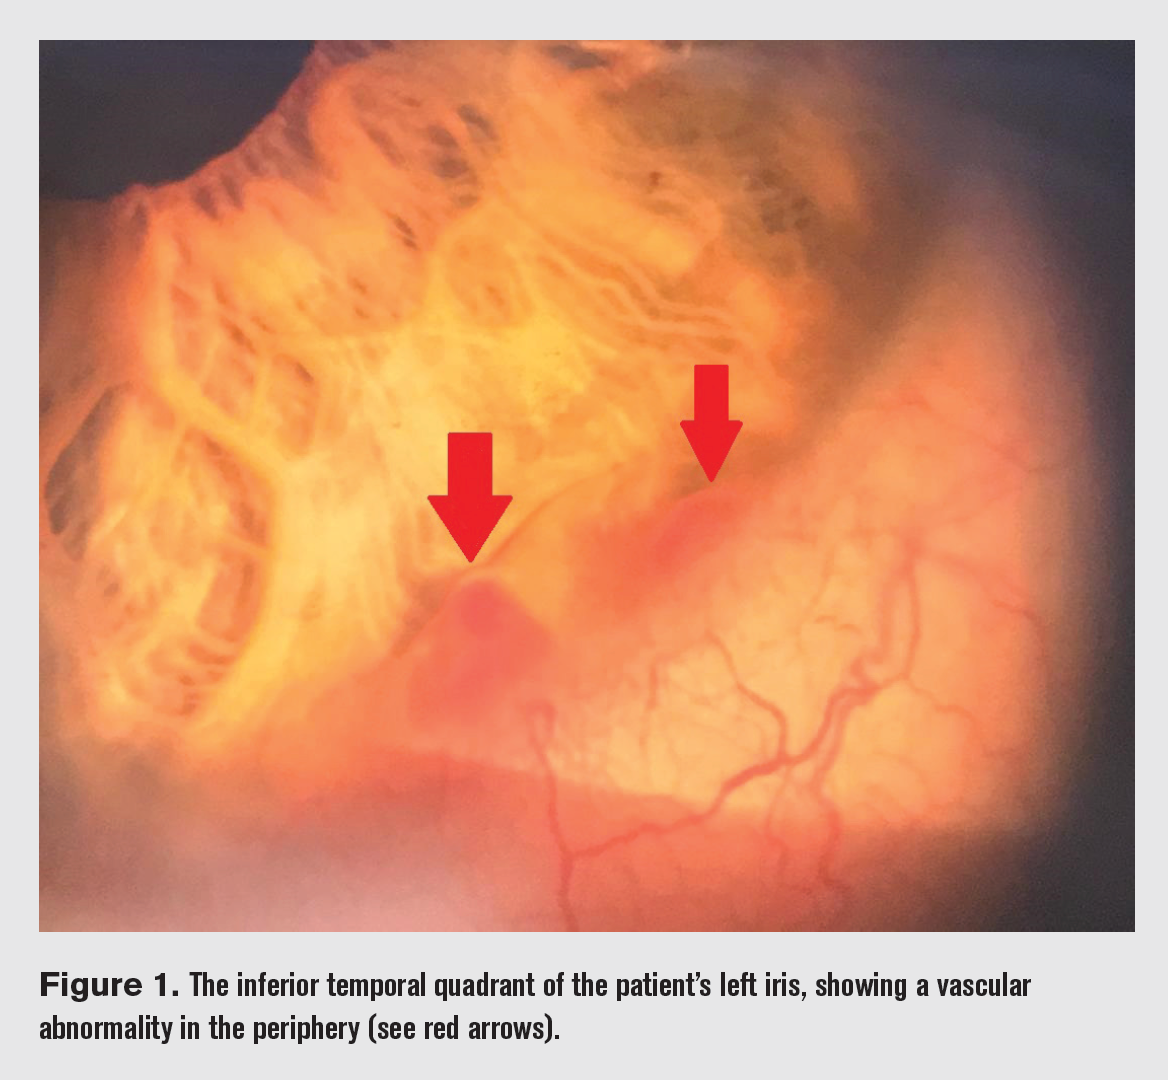 Case study: Vascular abnormality diagnosed as arteriovenous malformations of the iris